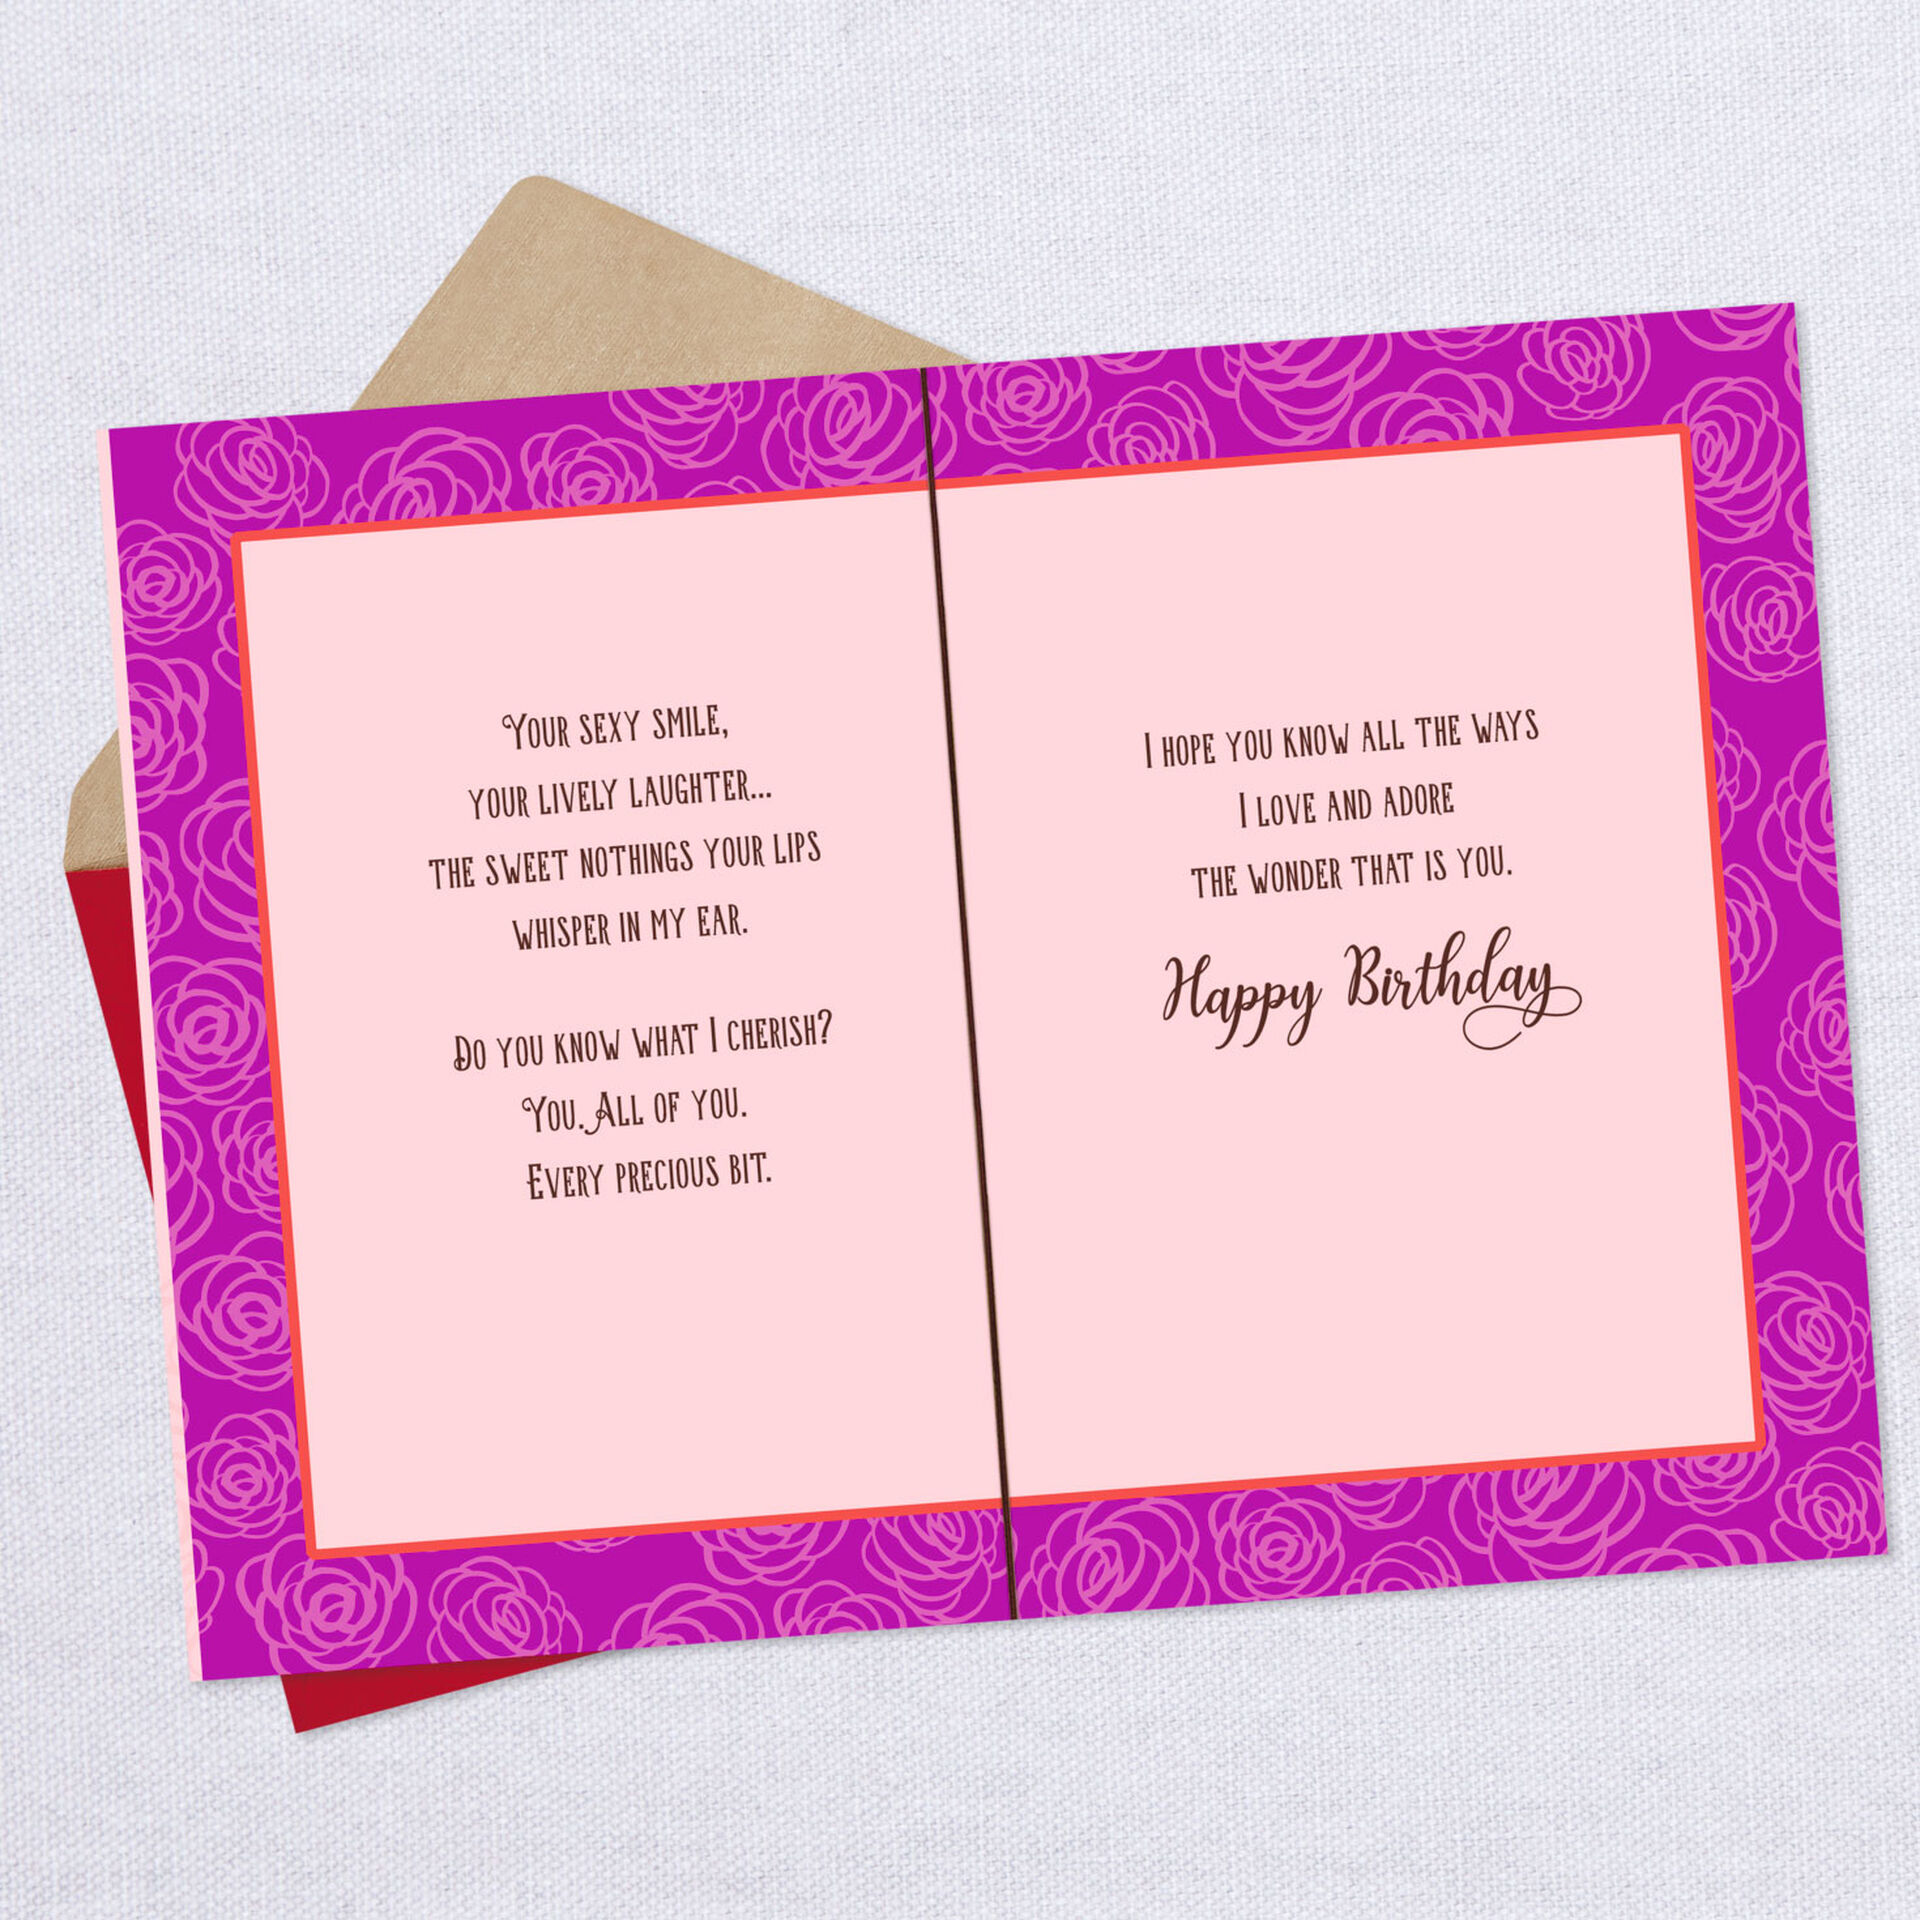 we fit together perfectly romantic birthday card